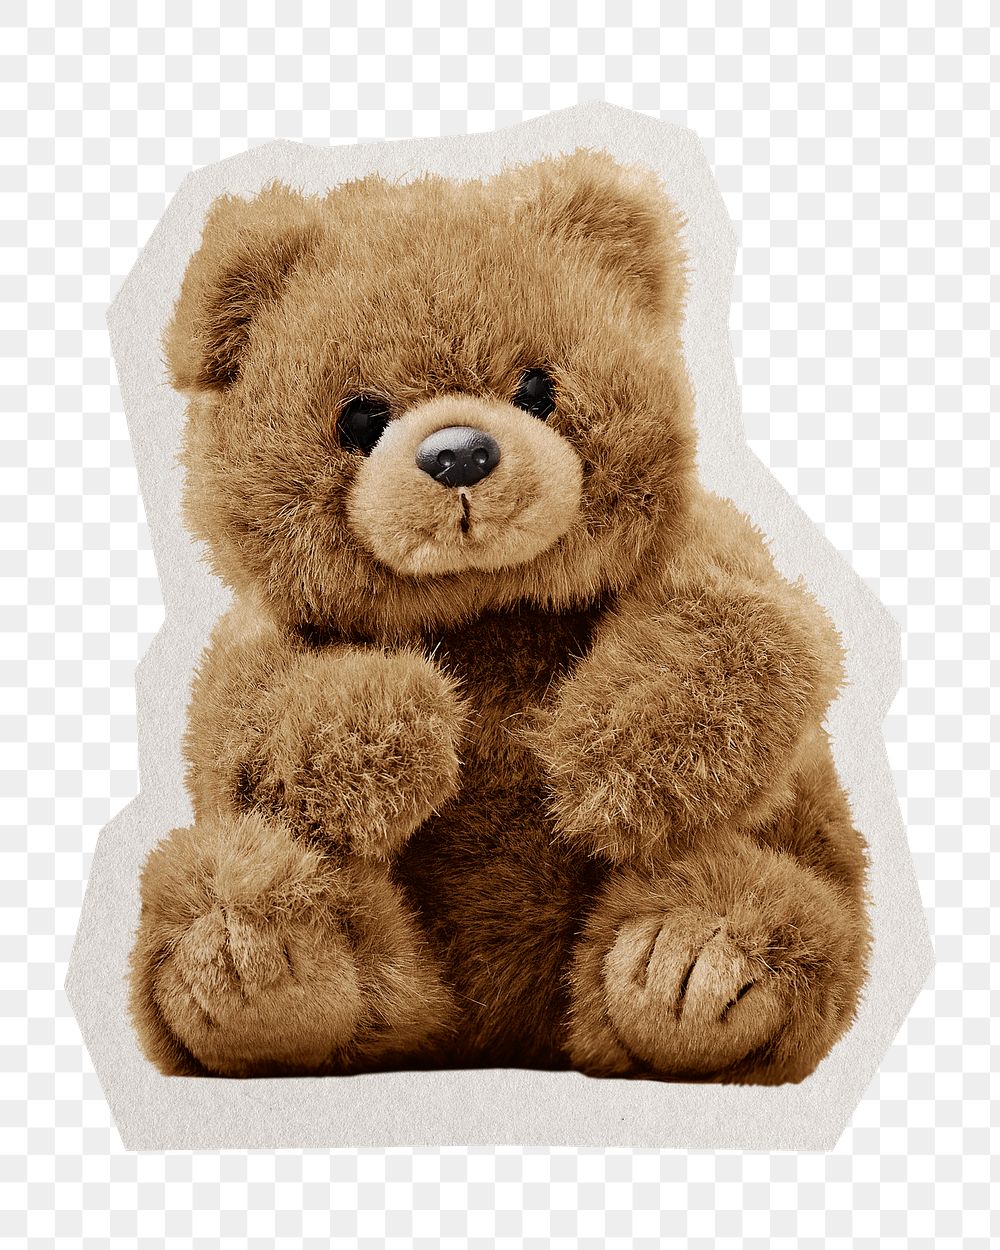 Teddy bear png sticker, paper cut on transparent background